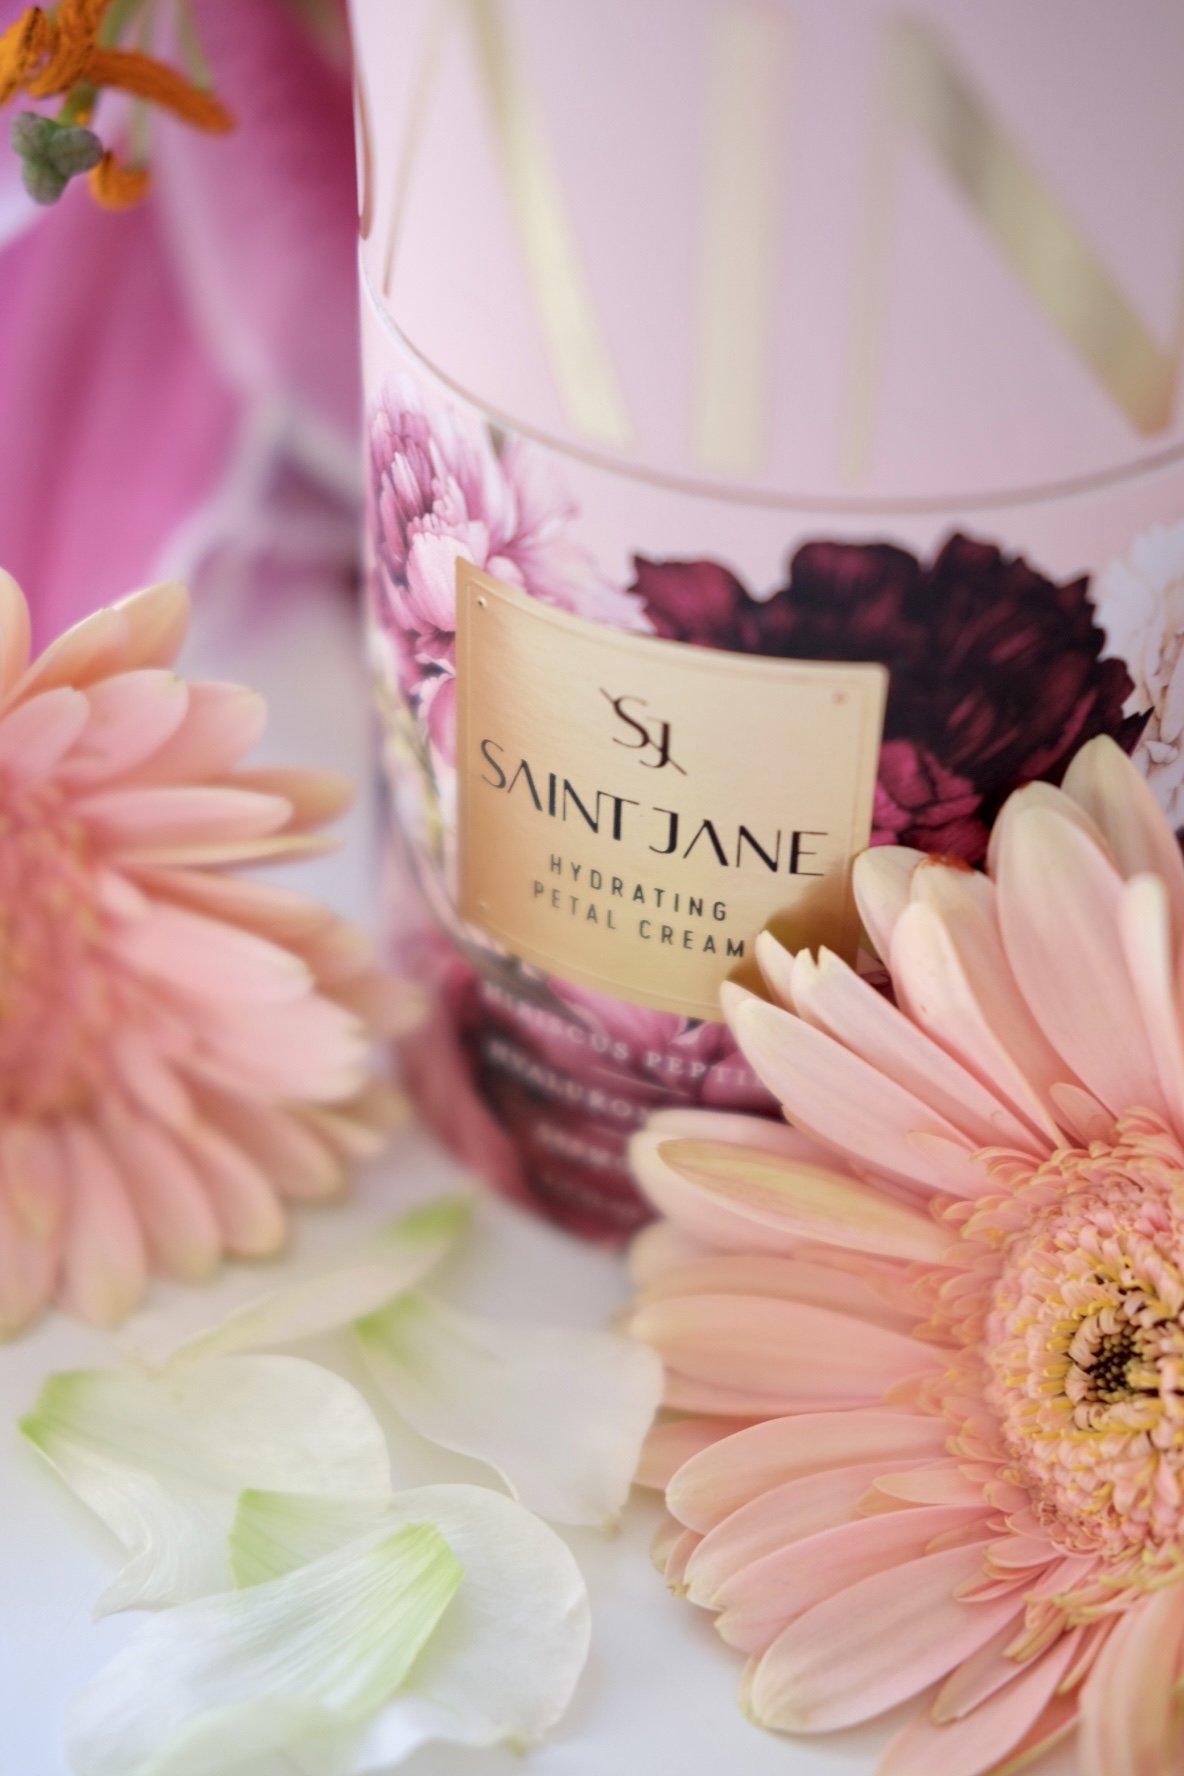 The next Saint Jane beauty review that I want to go through is a Saint Jane Petal Cream Review.   Saint Jane Petal Cream came out in 2021 and I was one of the lucky ones to get my hands on it when it first launched. The Saint Jane Petal Moisturizer i